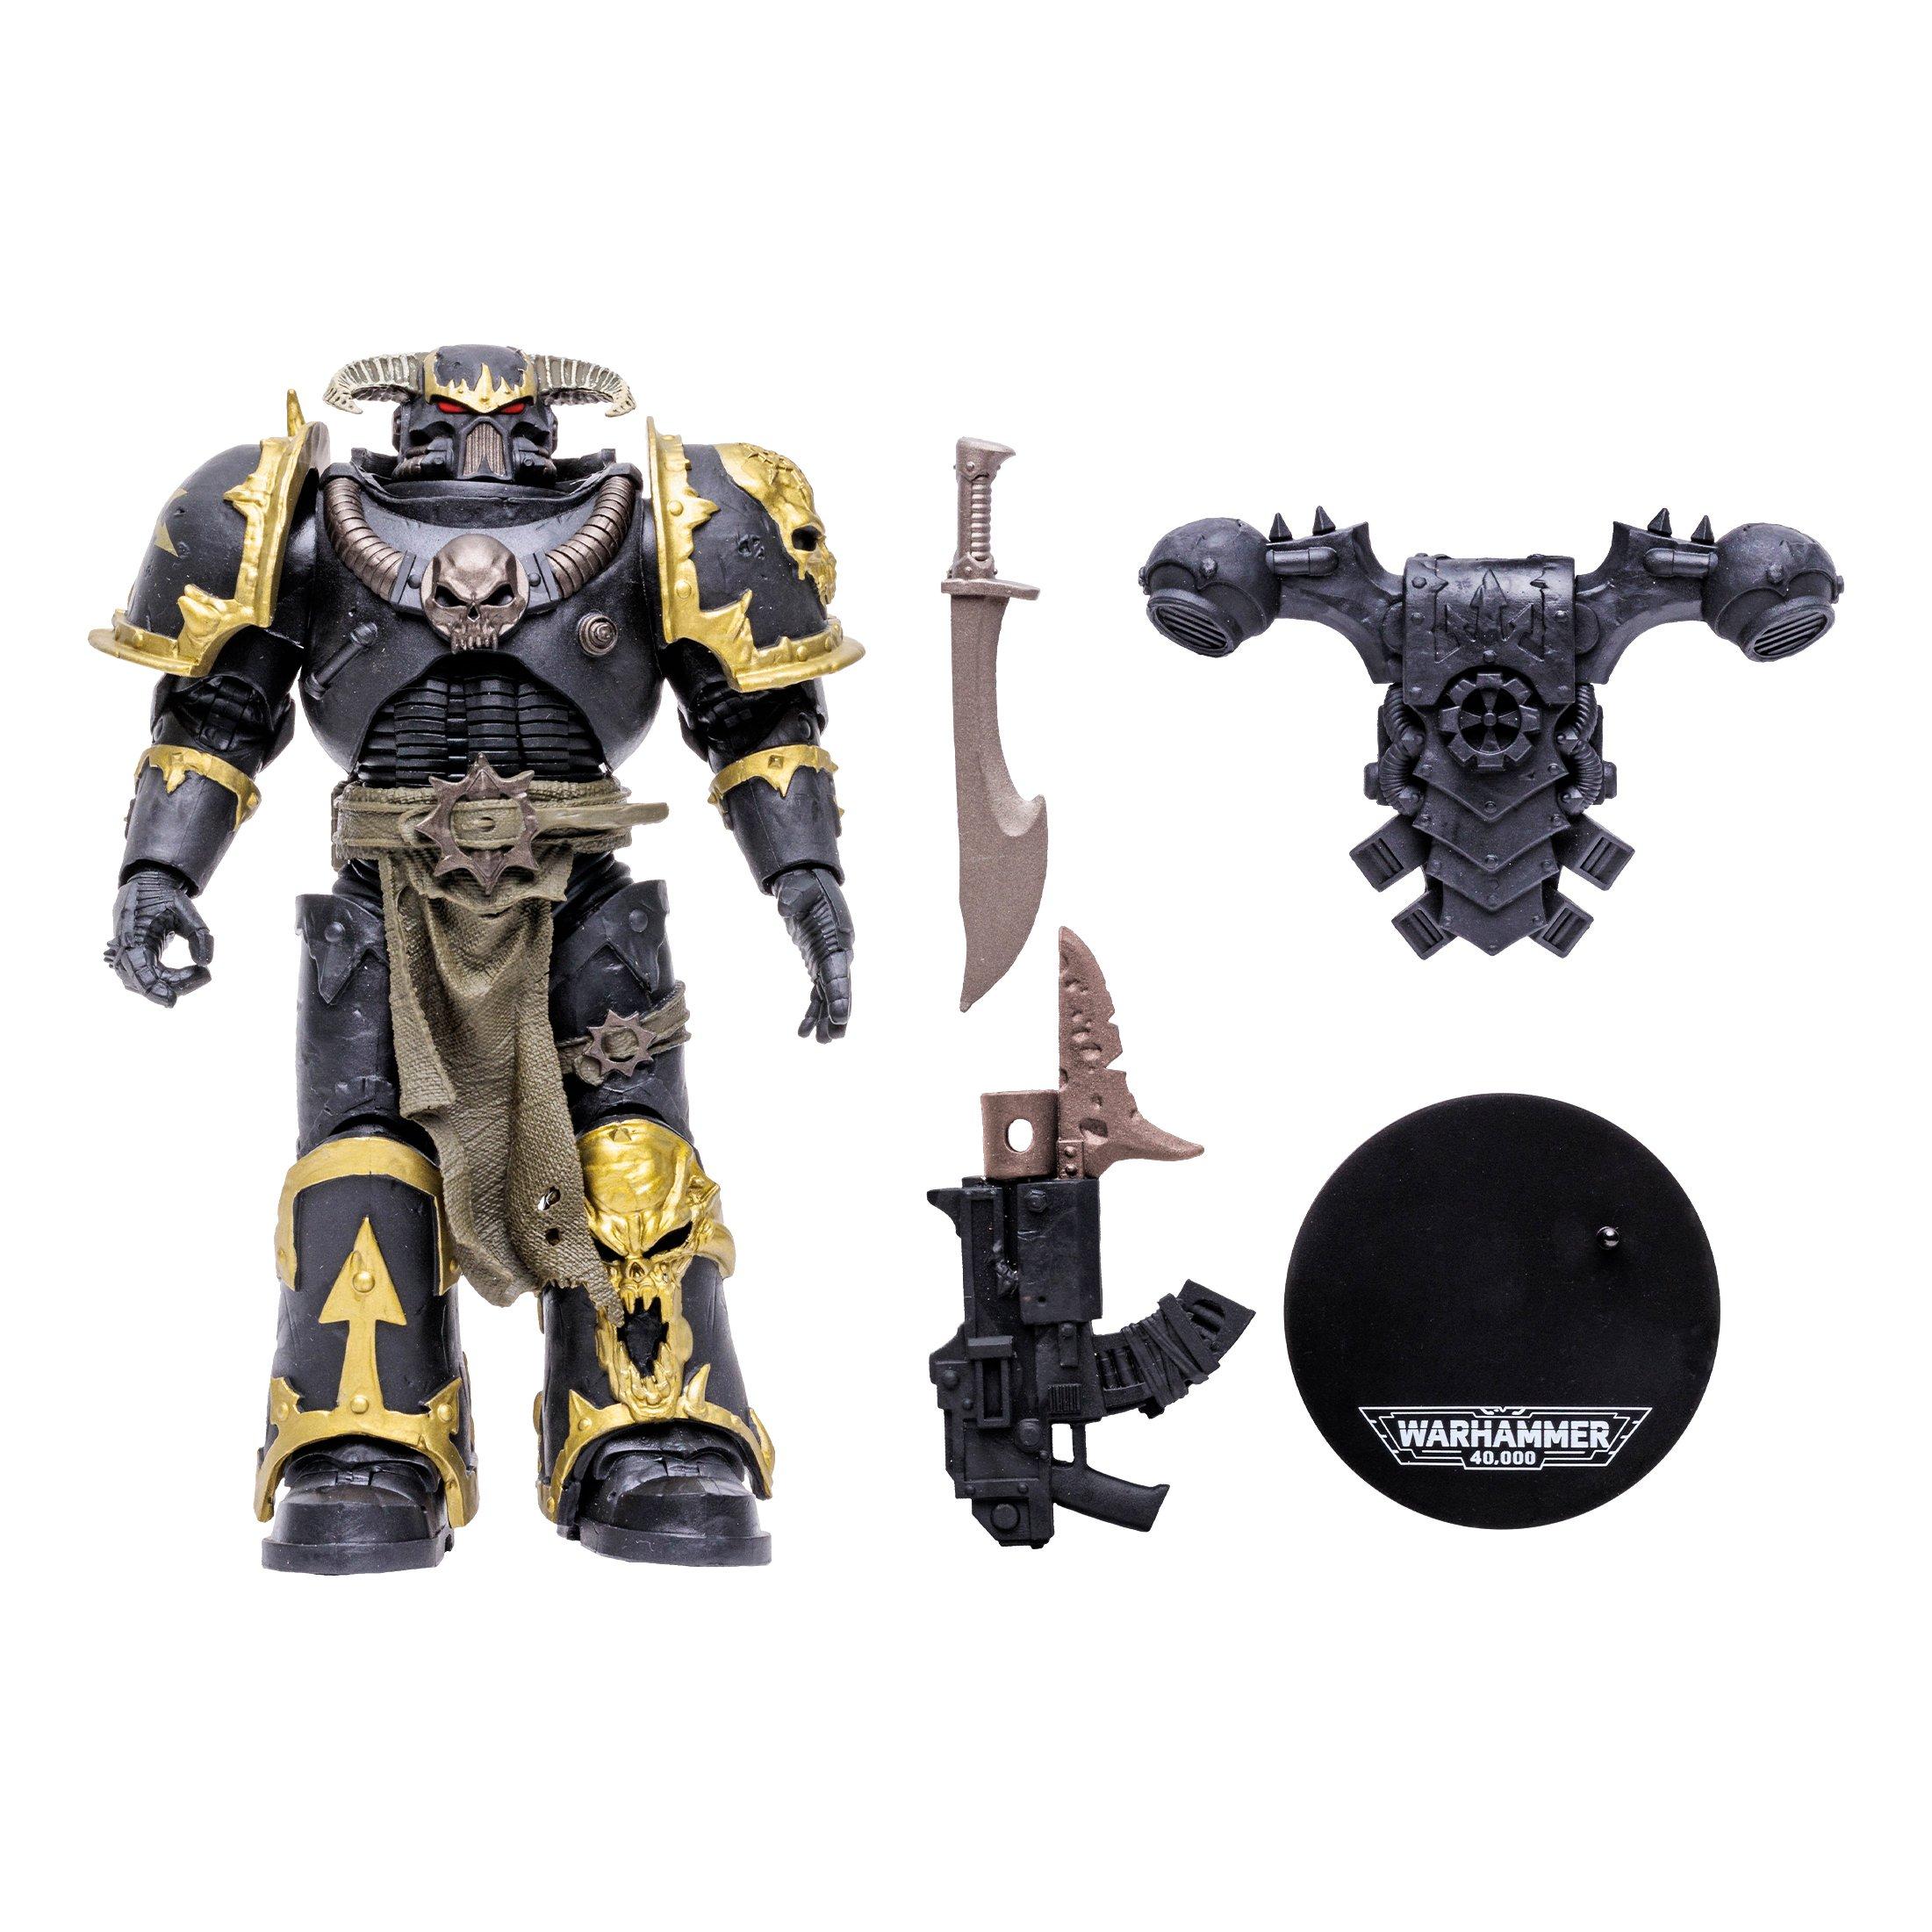 list item 2 of 10 McFarlane Toys Warhammer 40,000 Chaos Space Marine 7-in Scale Action Figure